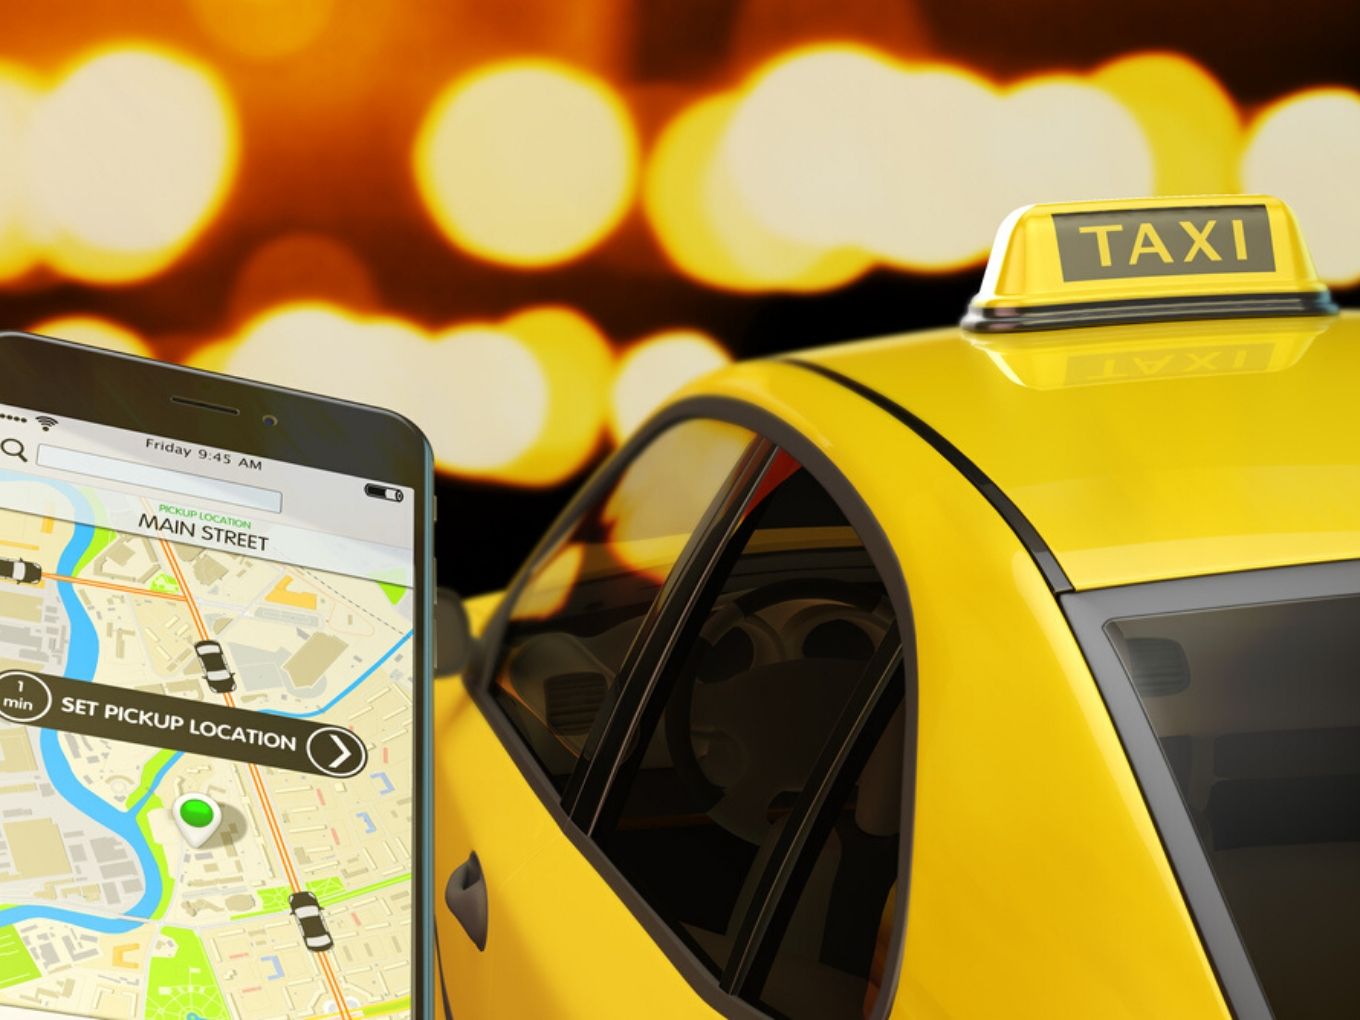 10% Commission, 2x Surge Cap: India’s New Rules For Ola, Uber